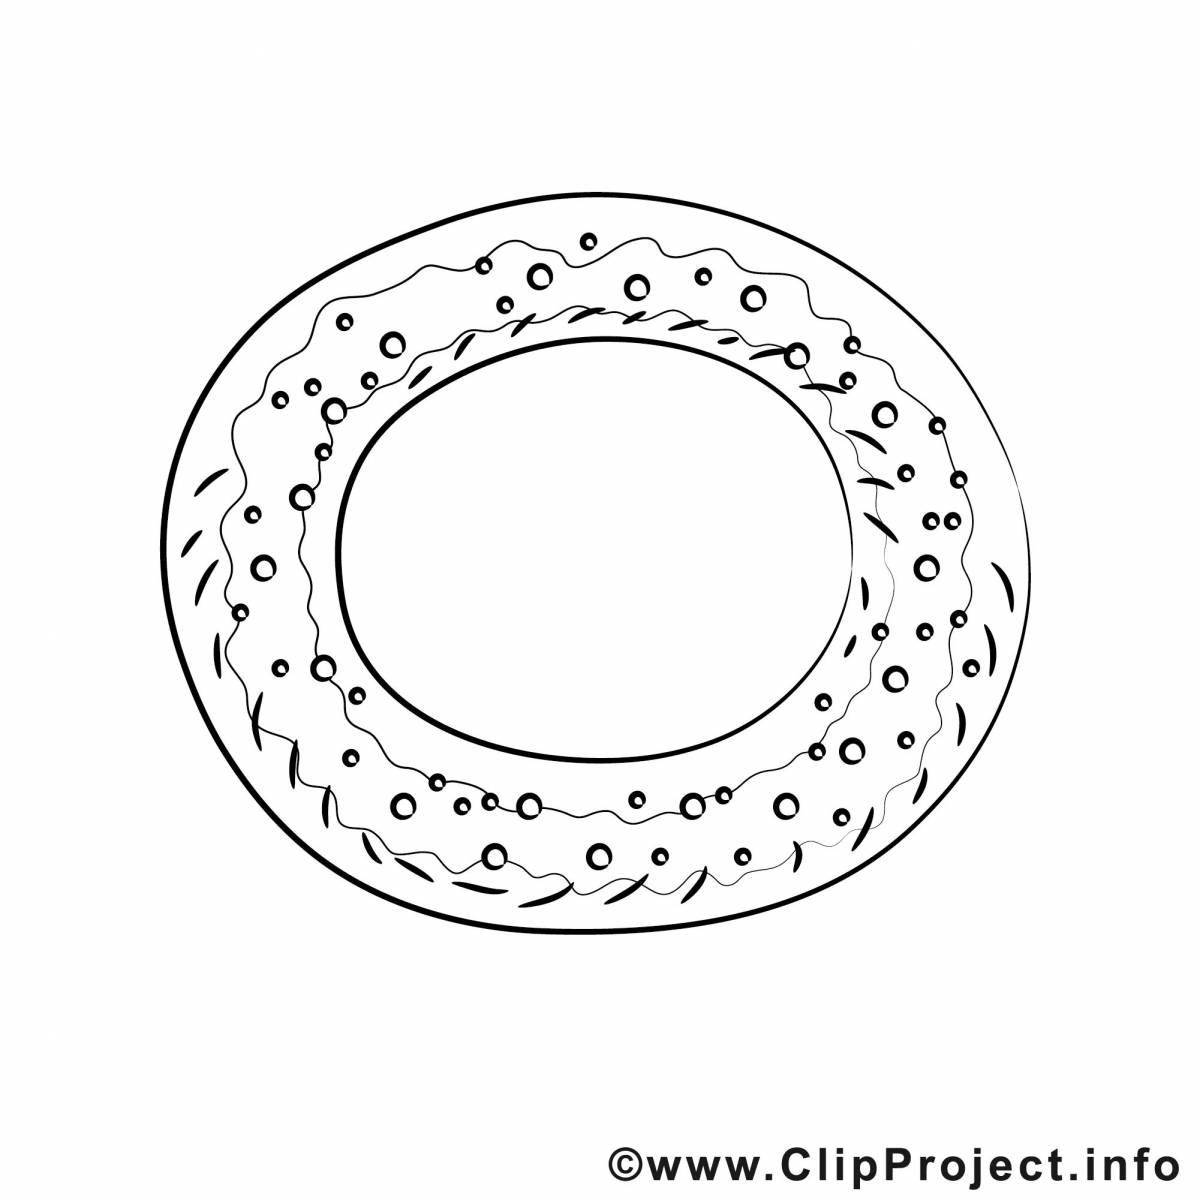 Sky donut coloring page